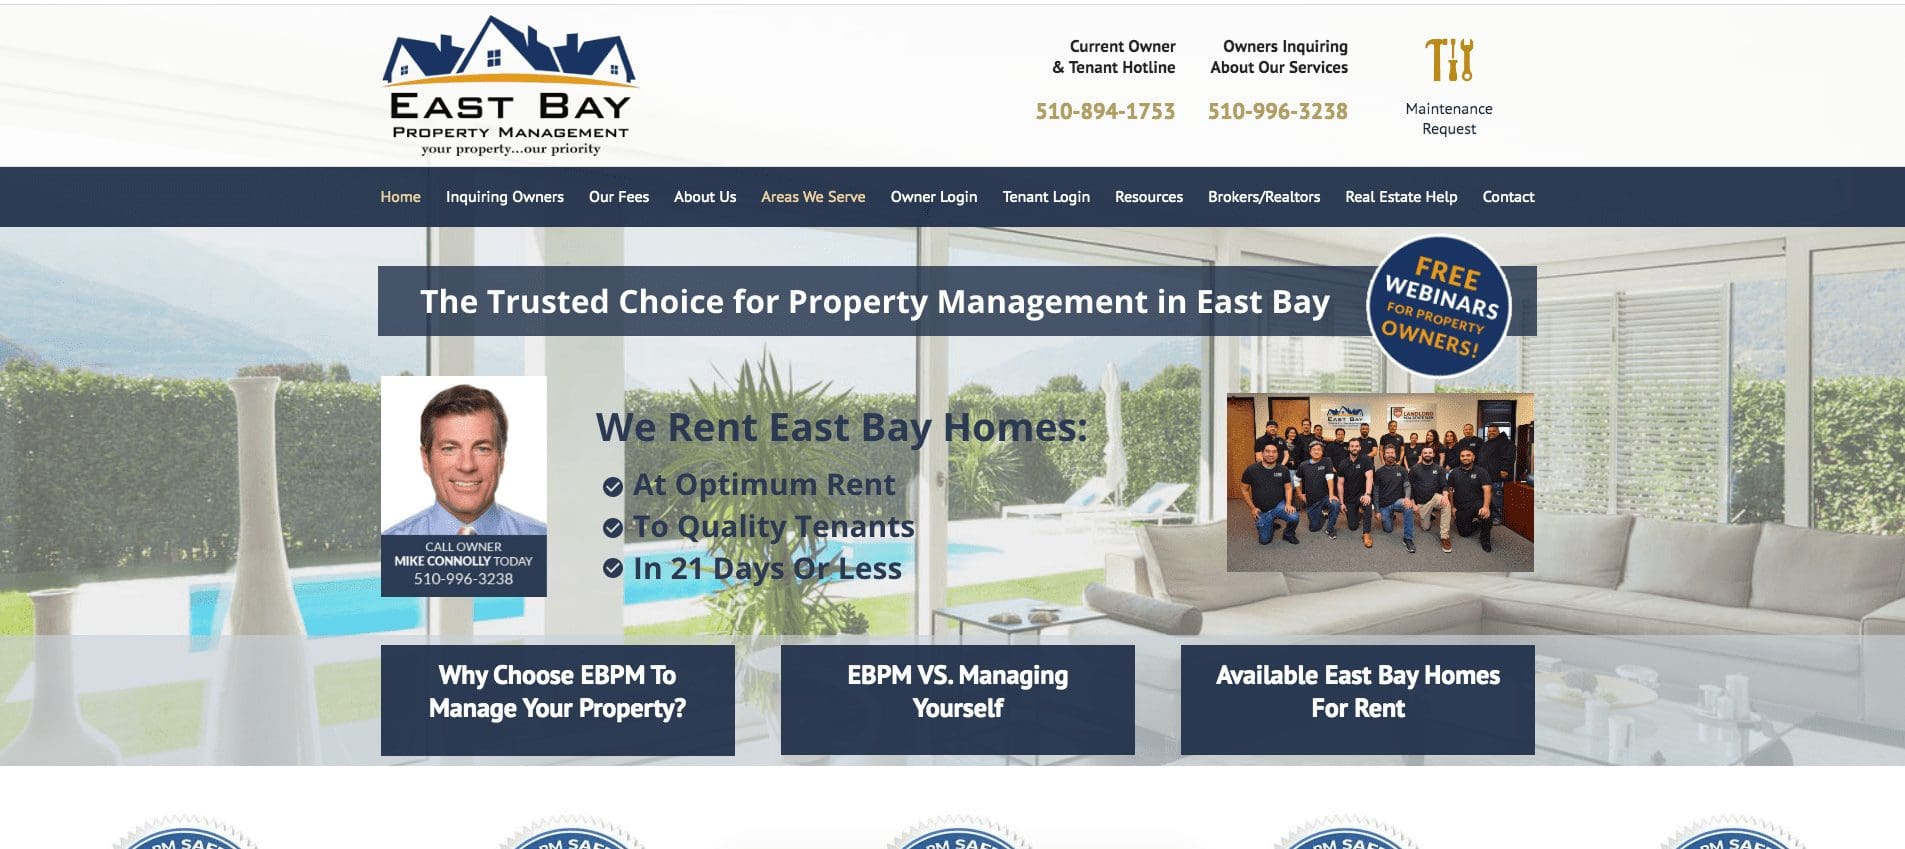 Easy bay property management, a property management company in San Francisco